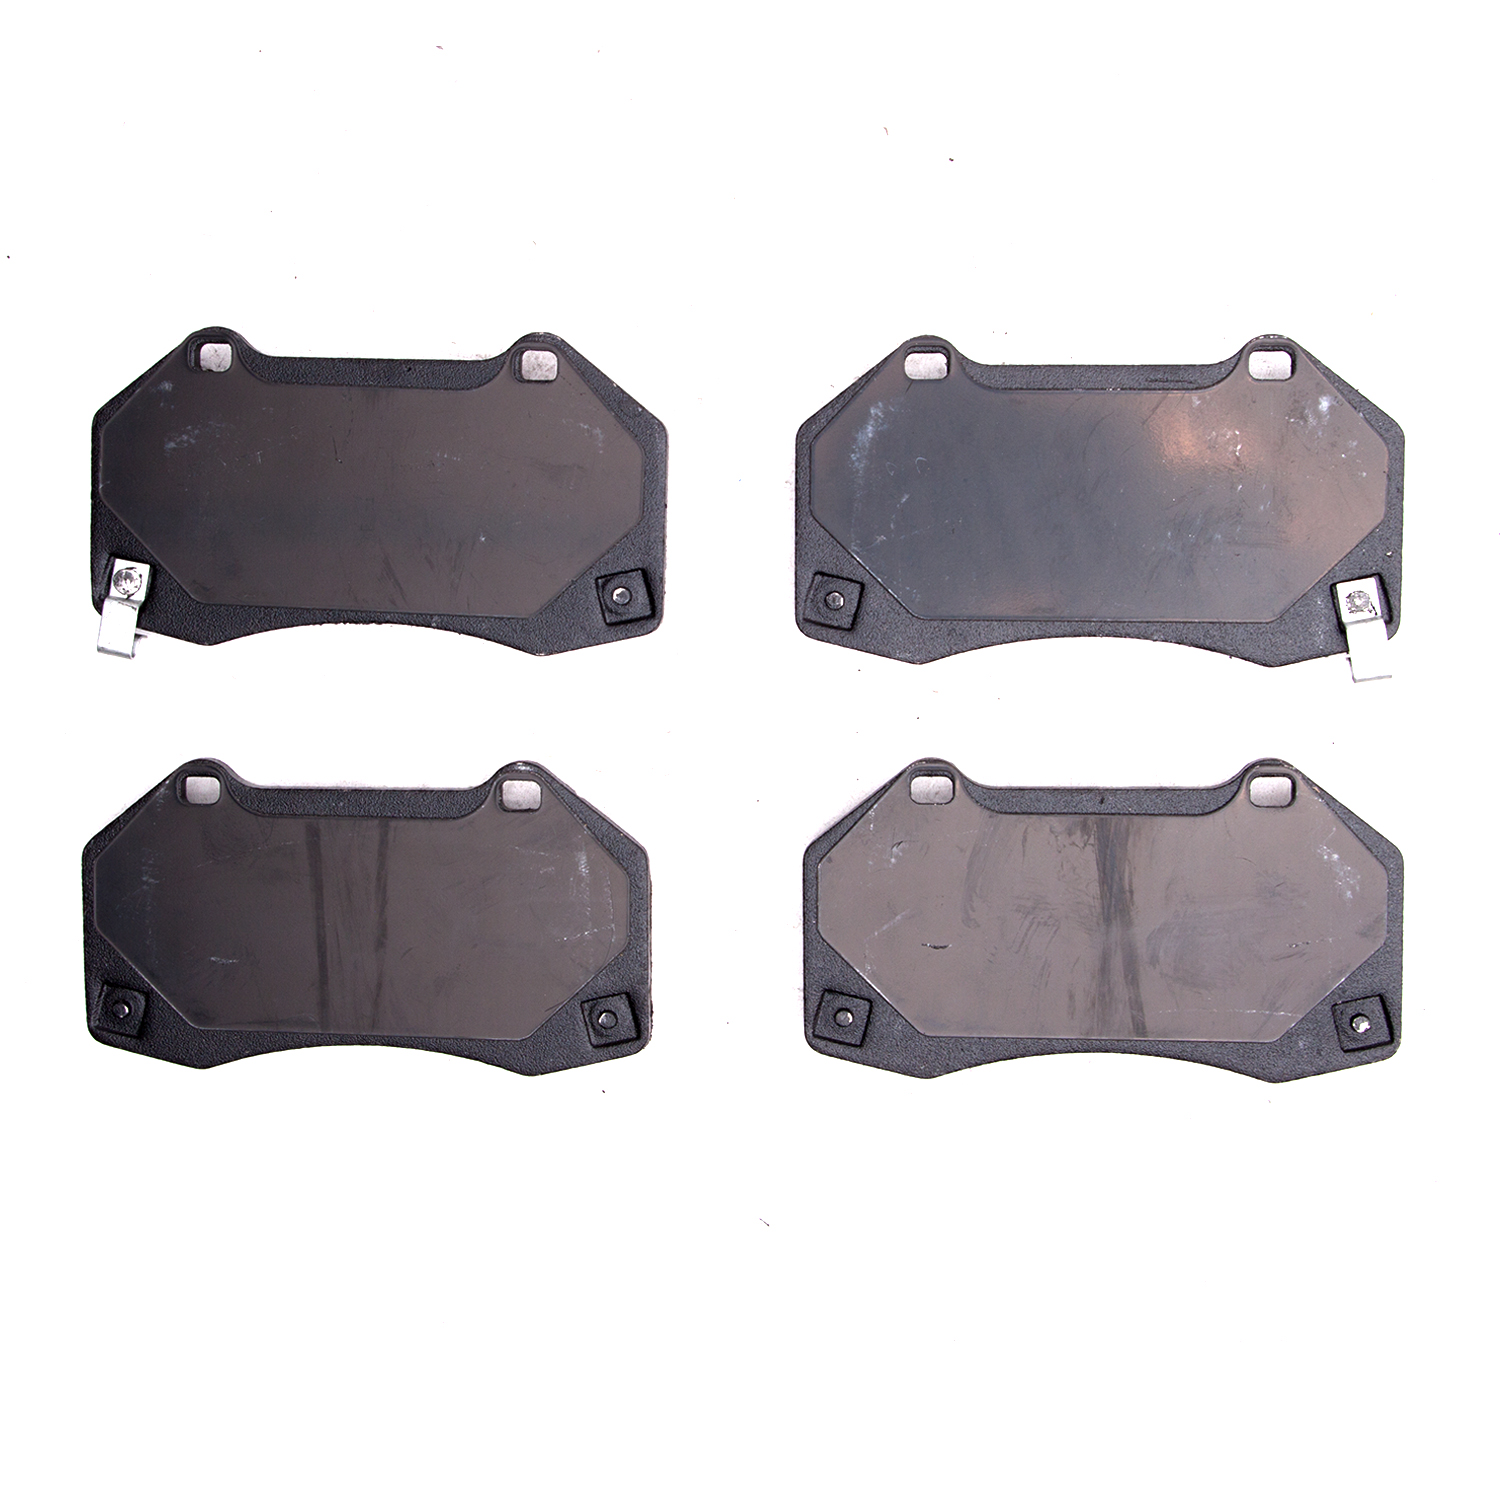 Performance Sport Brake Pads, Fits Select Fits Multiple